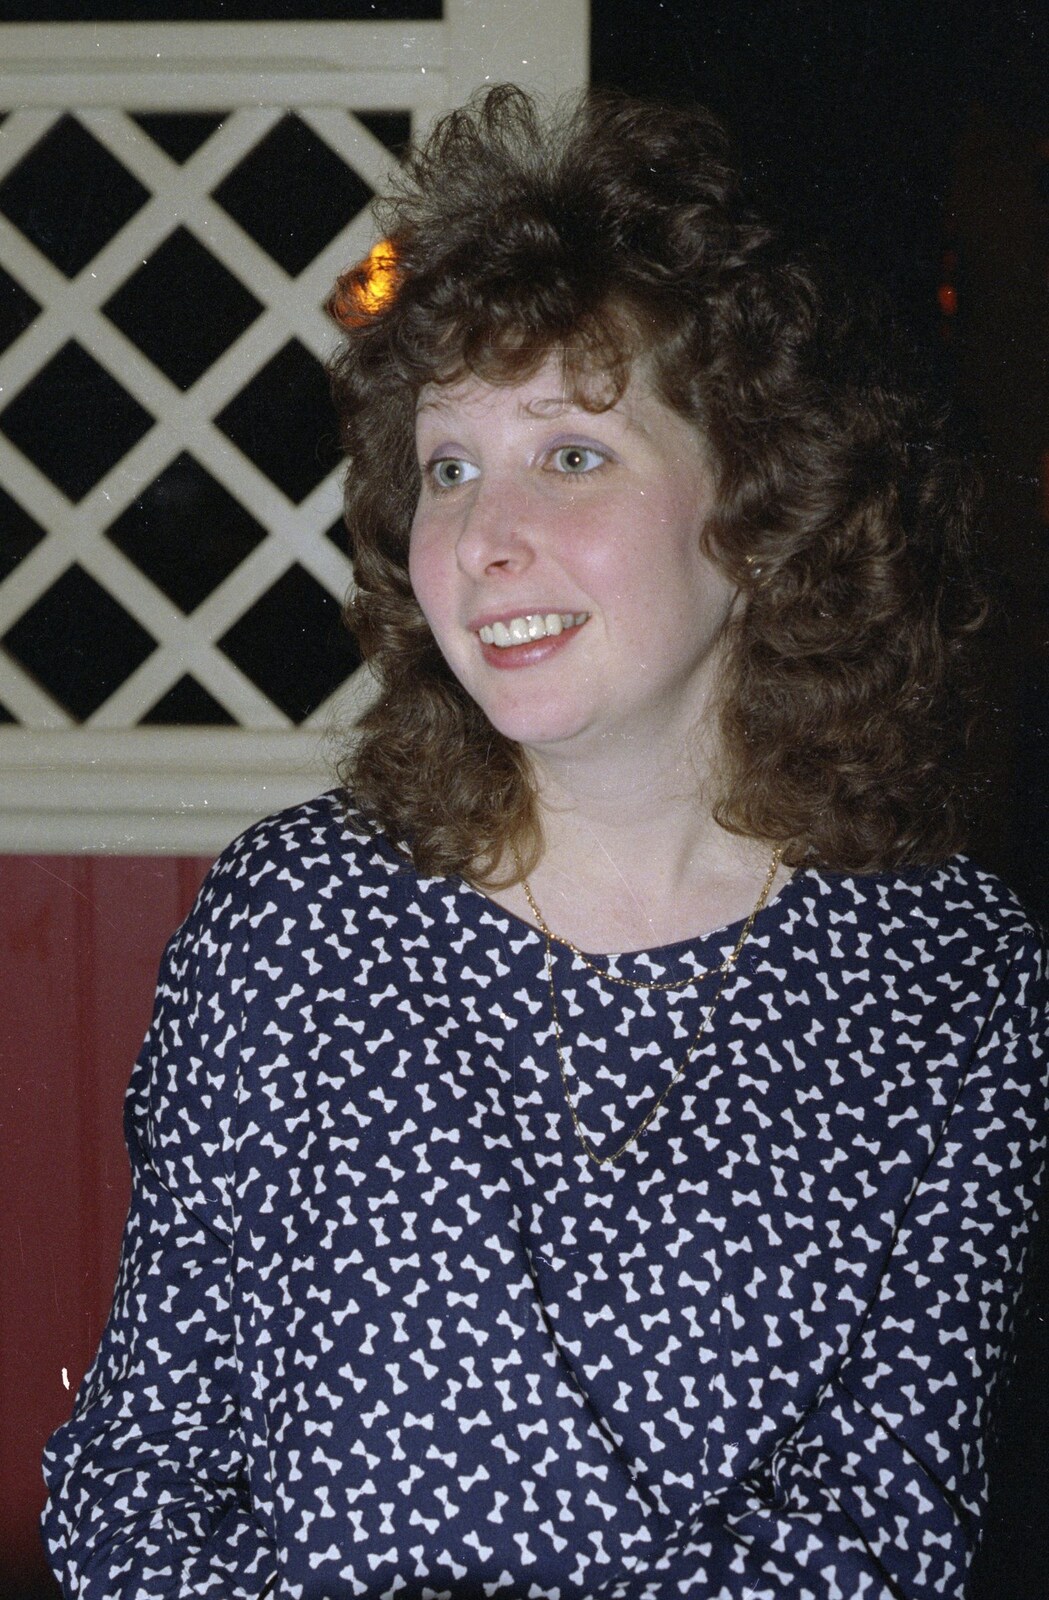 Alison Nightingale from Printec at the Park Hotel, Diss, Norfolk - 14th January 1992